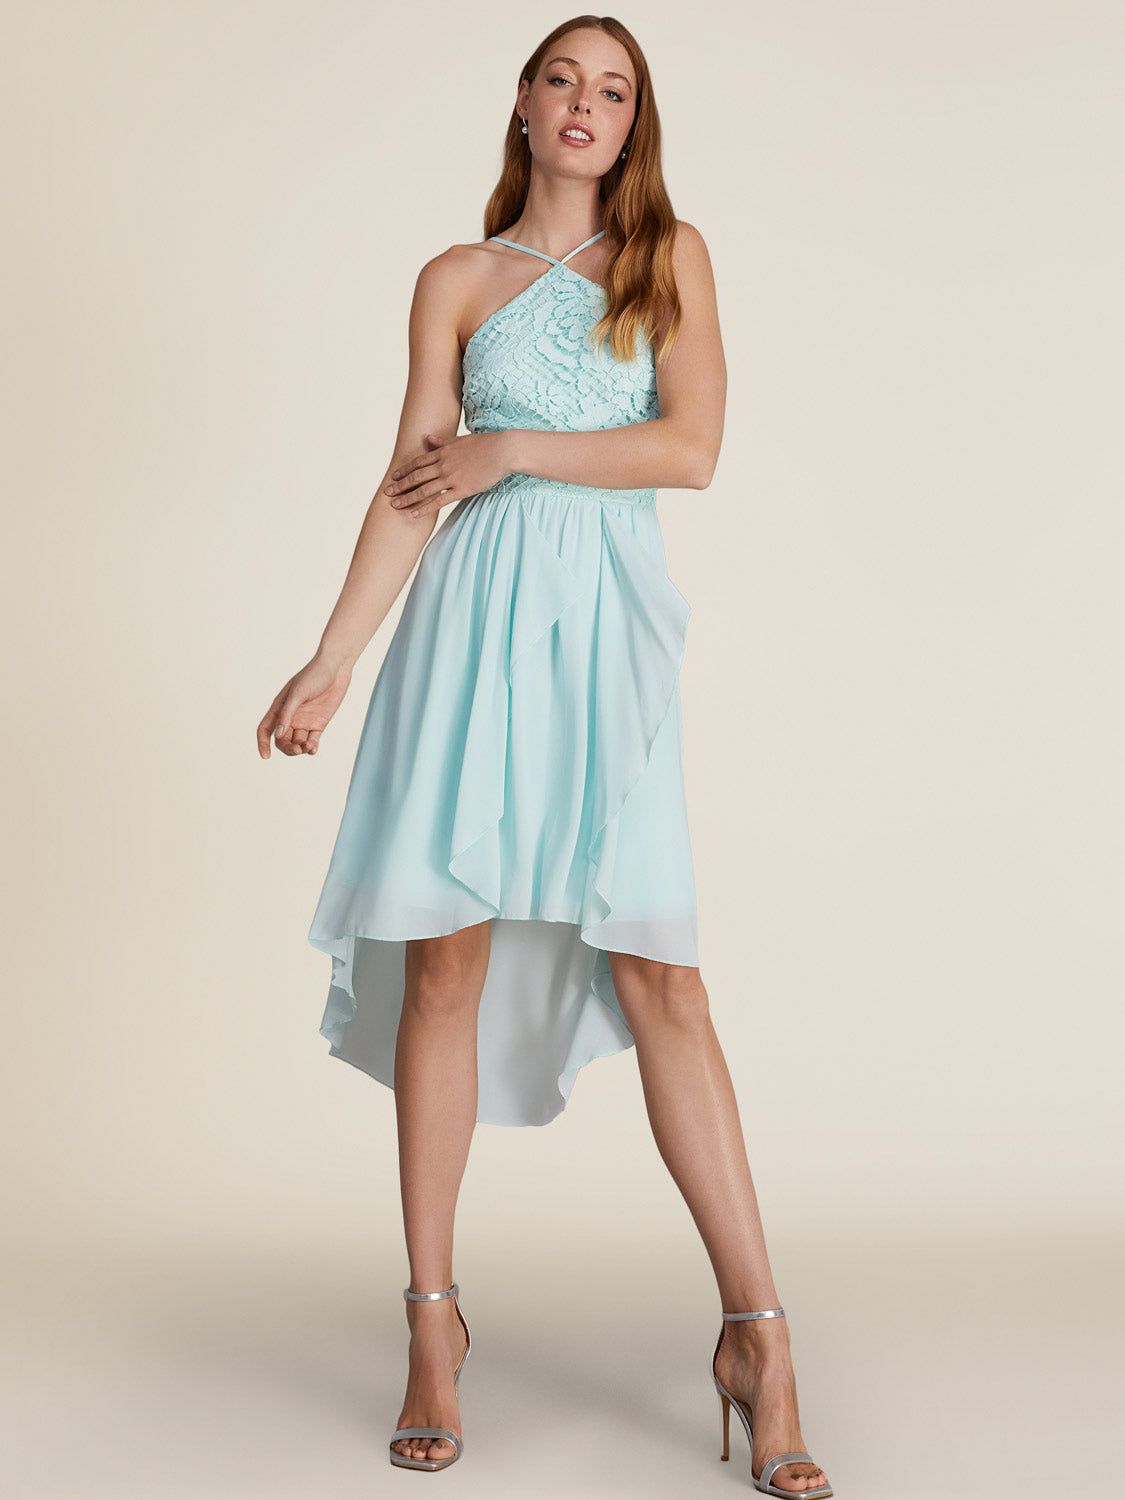 Lace Halter Top Knee Length Fit & Flare Dress